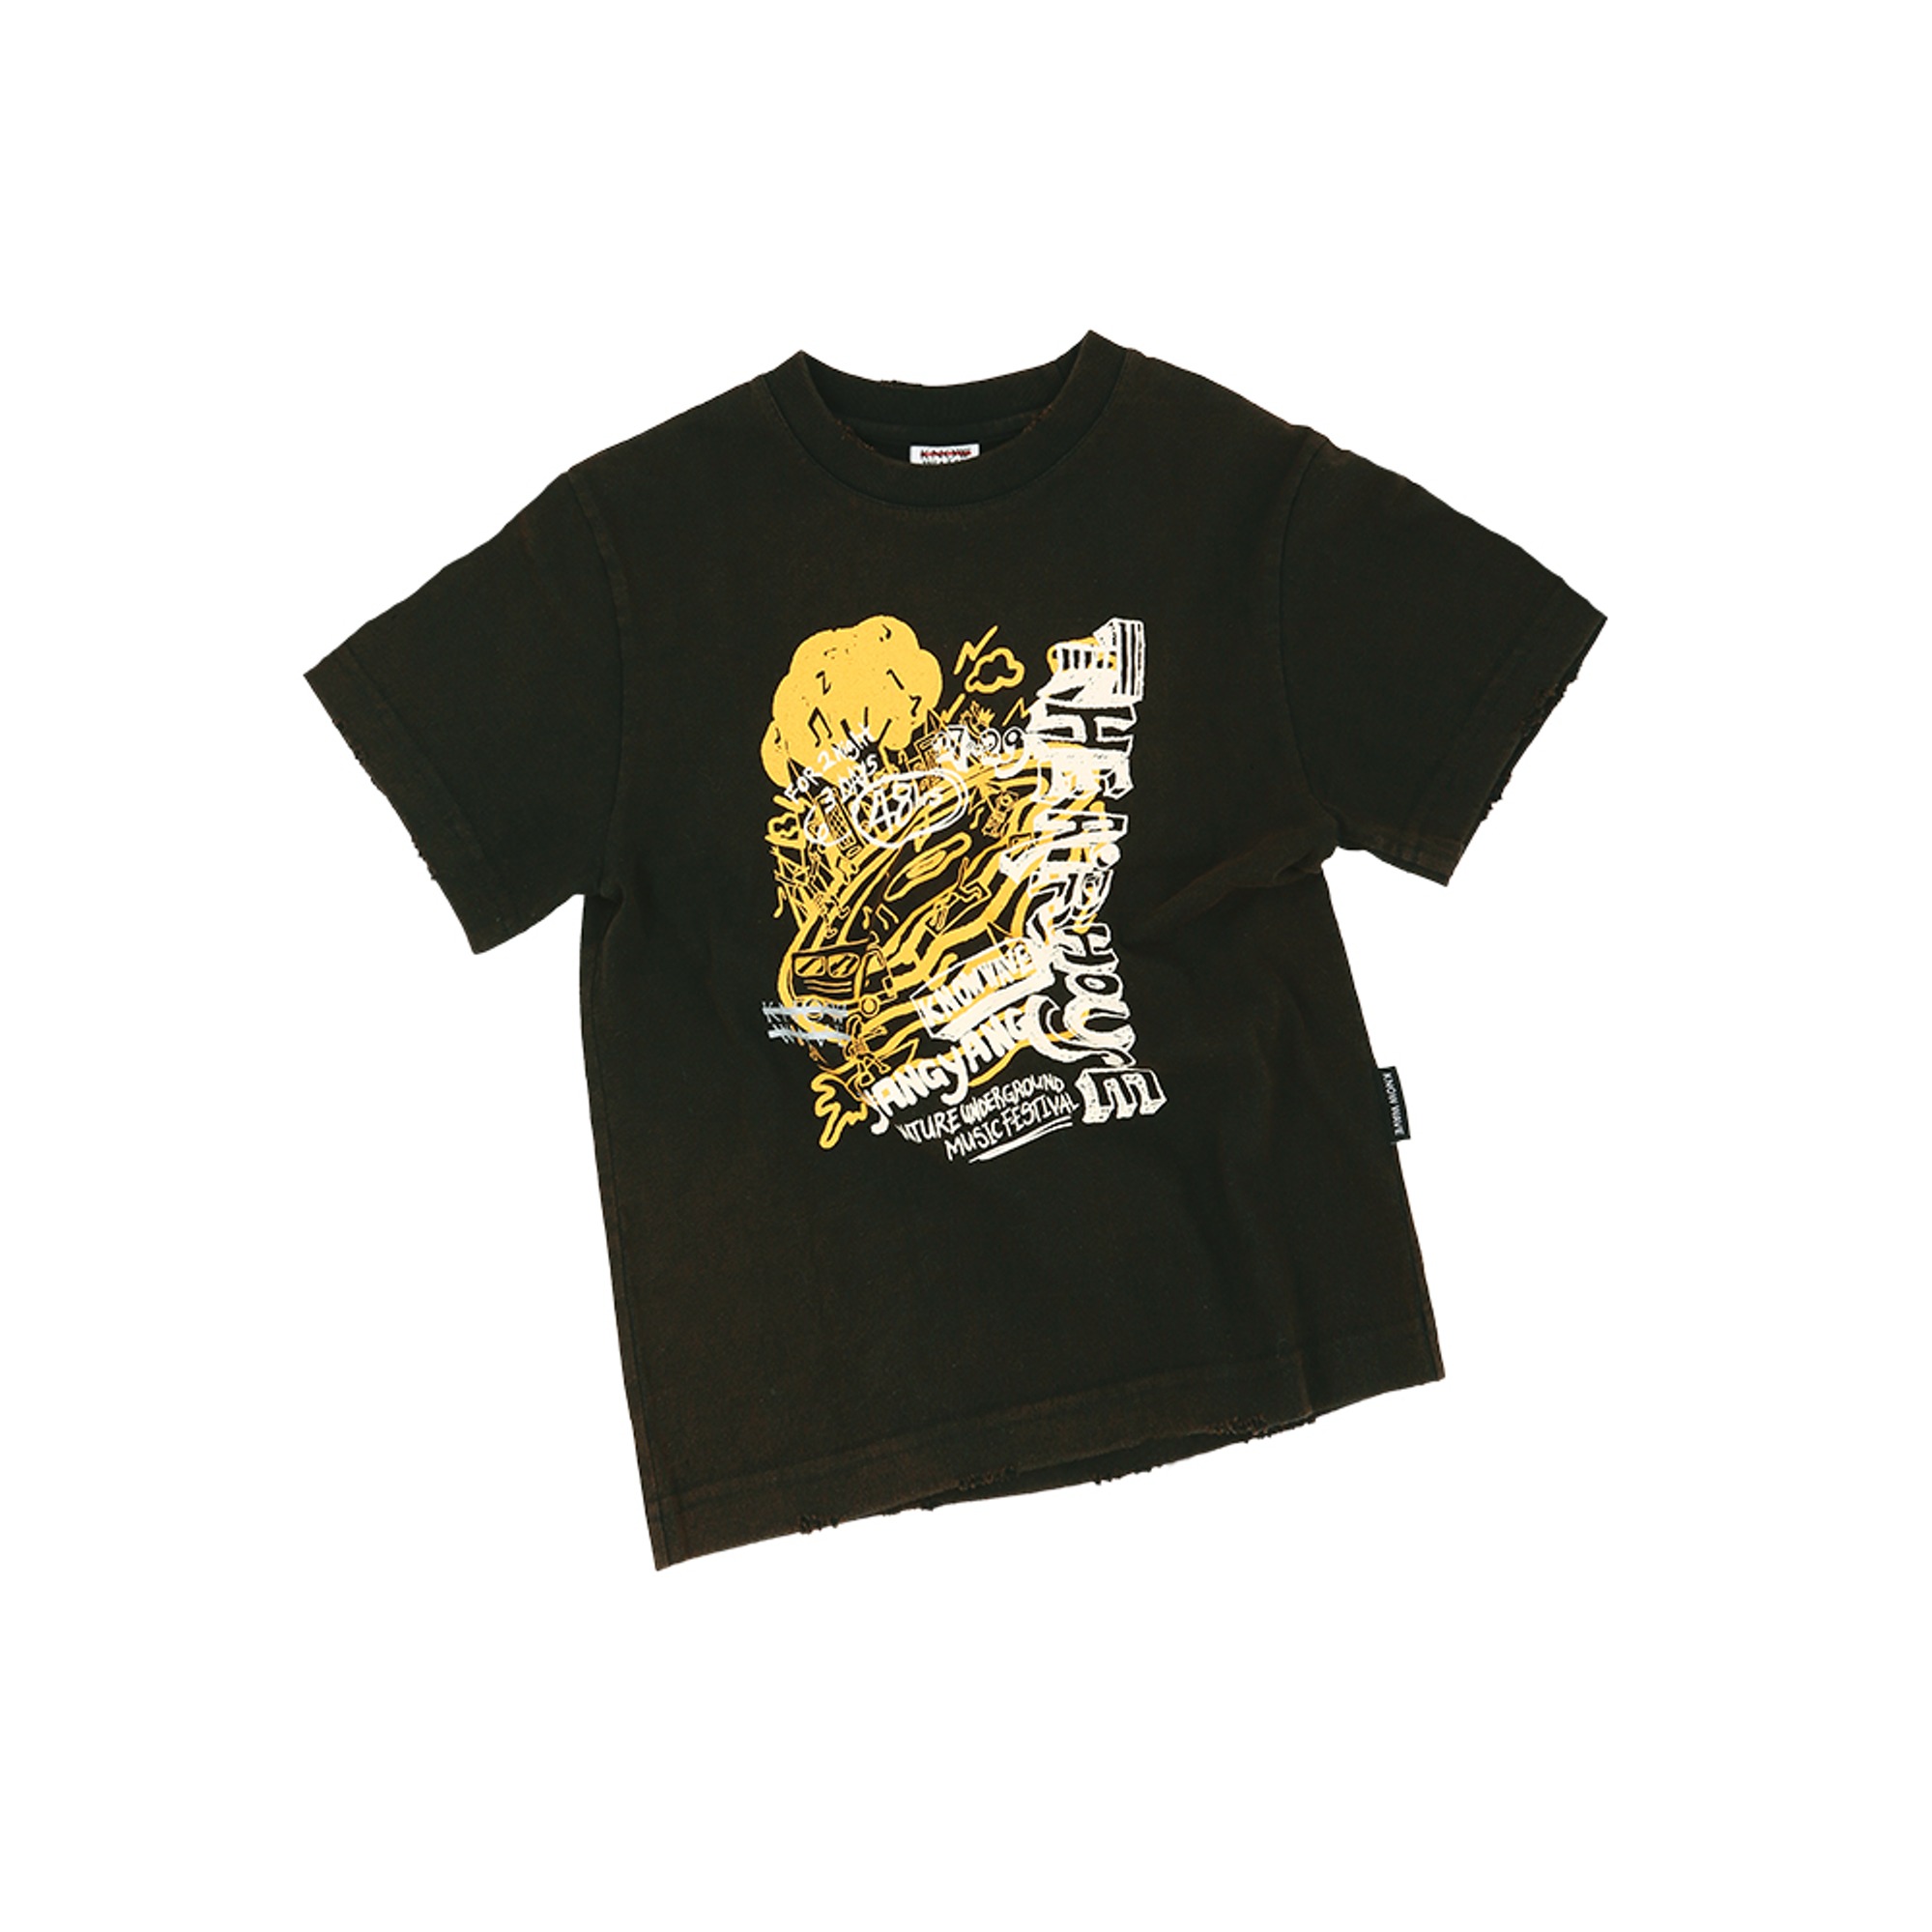 KNOW WAVE X THE AIR HOUSE GRAPHIC T SHIRTS KNT071u(BLACK)